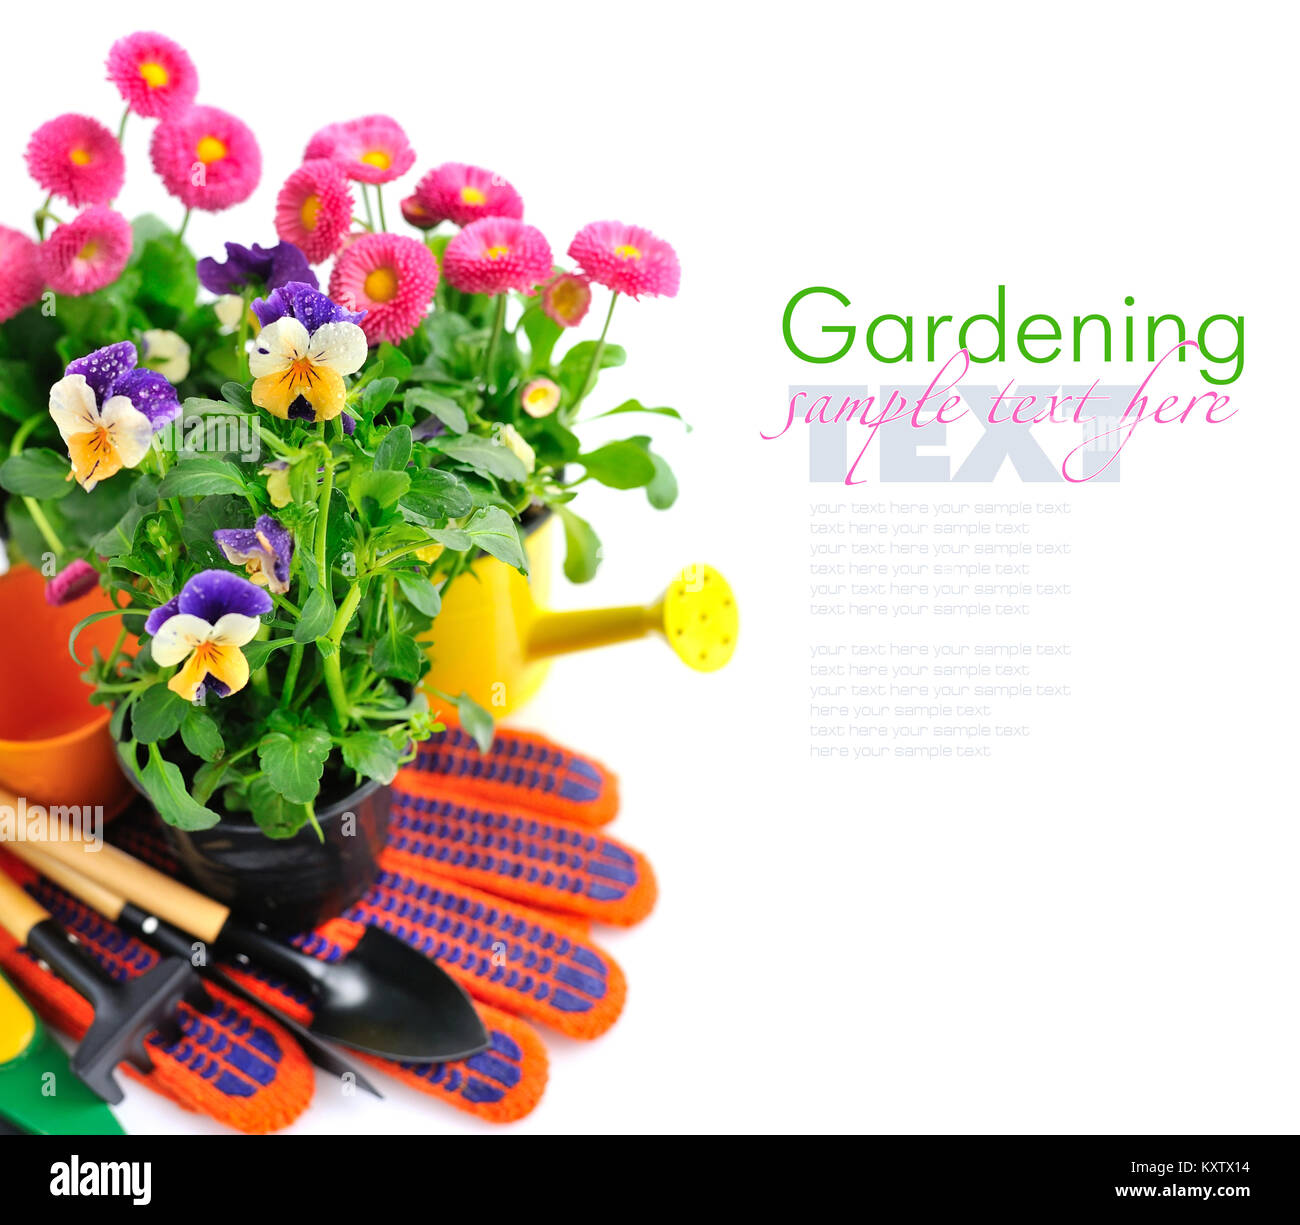 Gardening tools and spring flowers on a white background Stock Photo